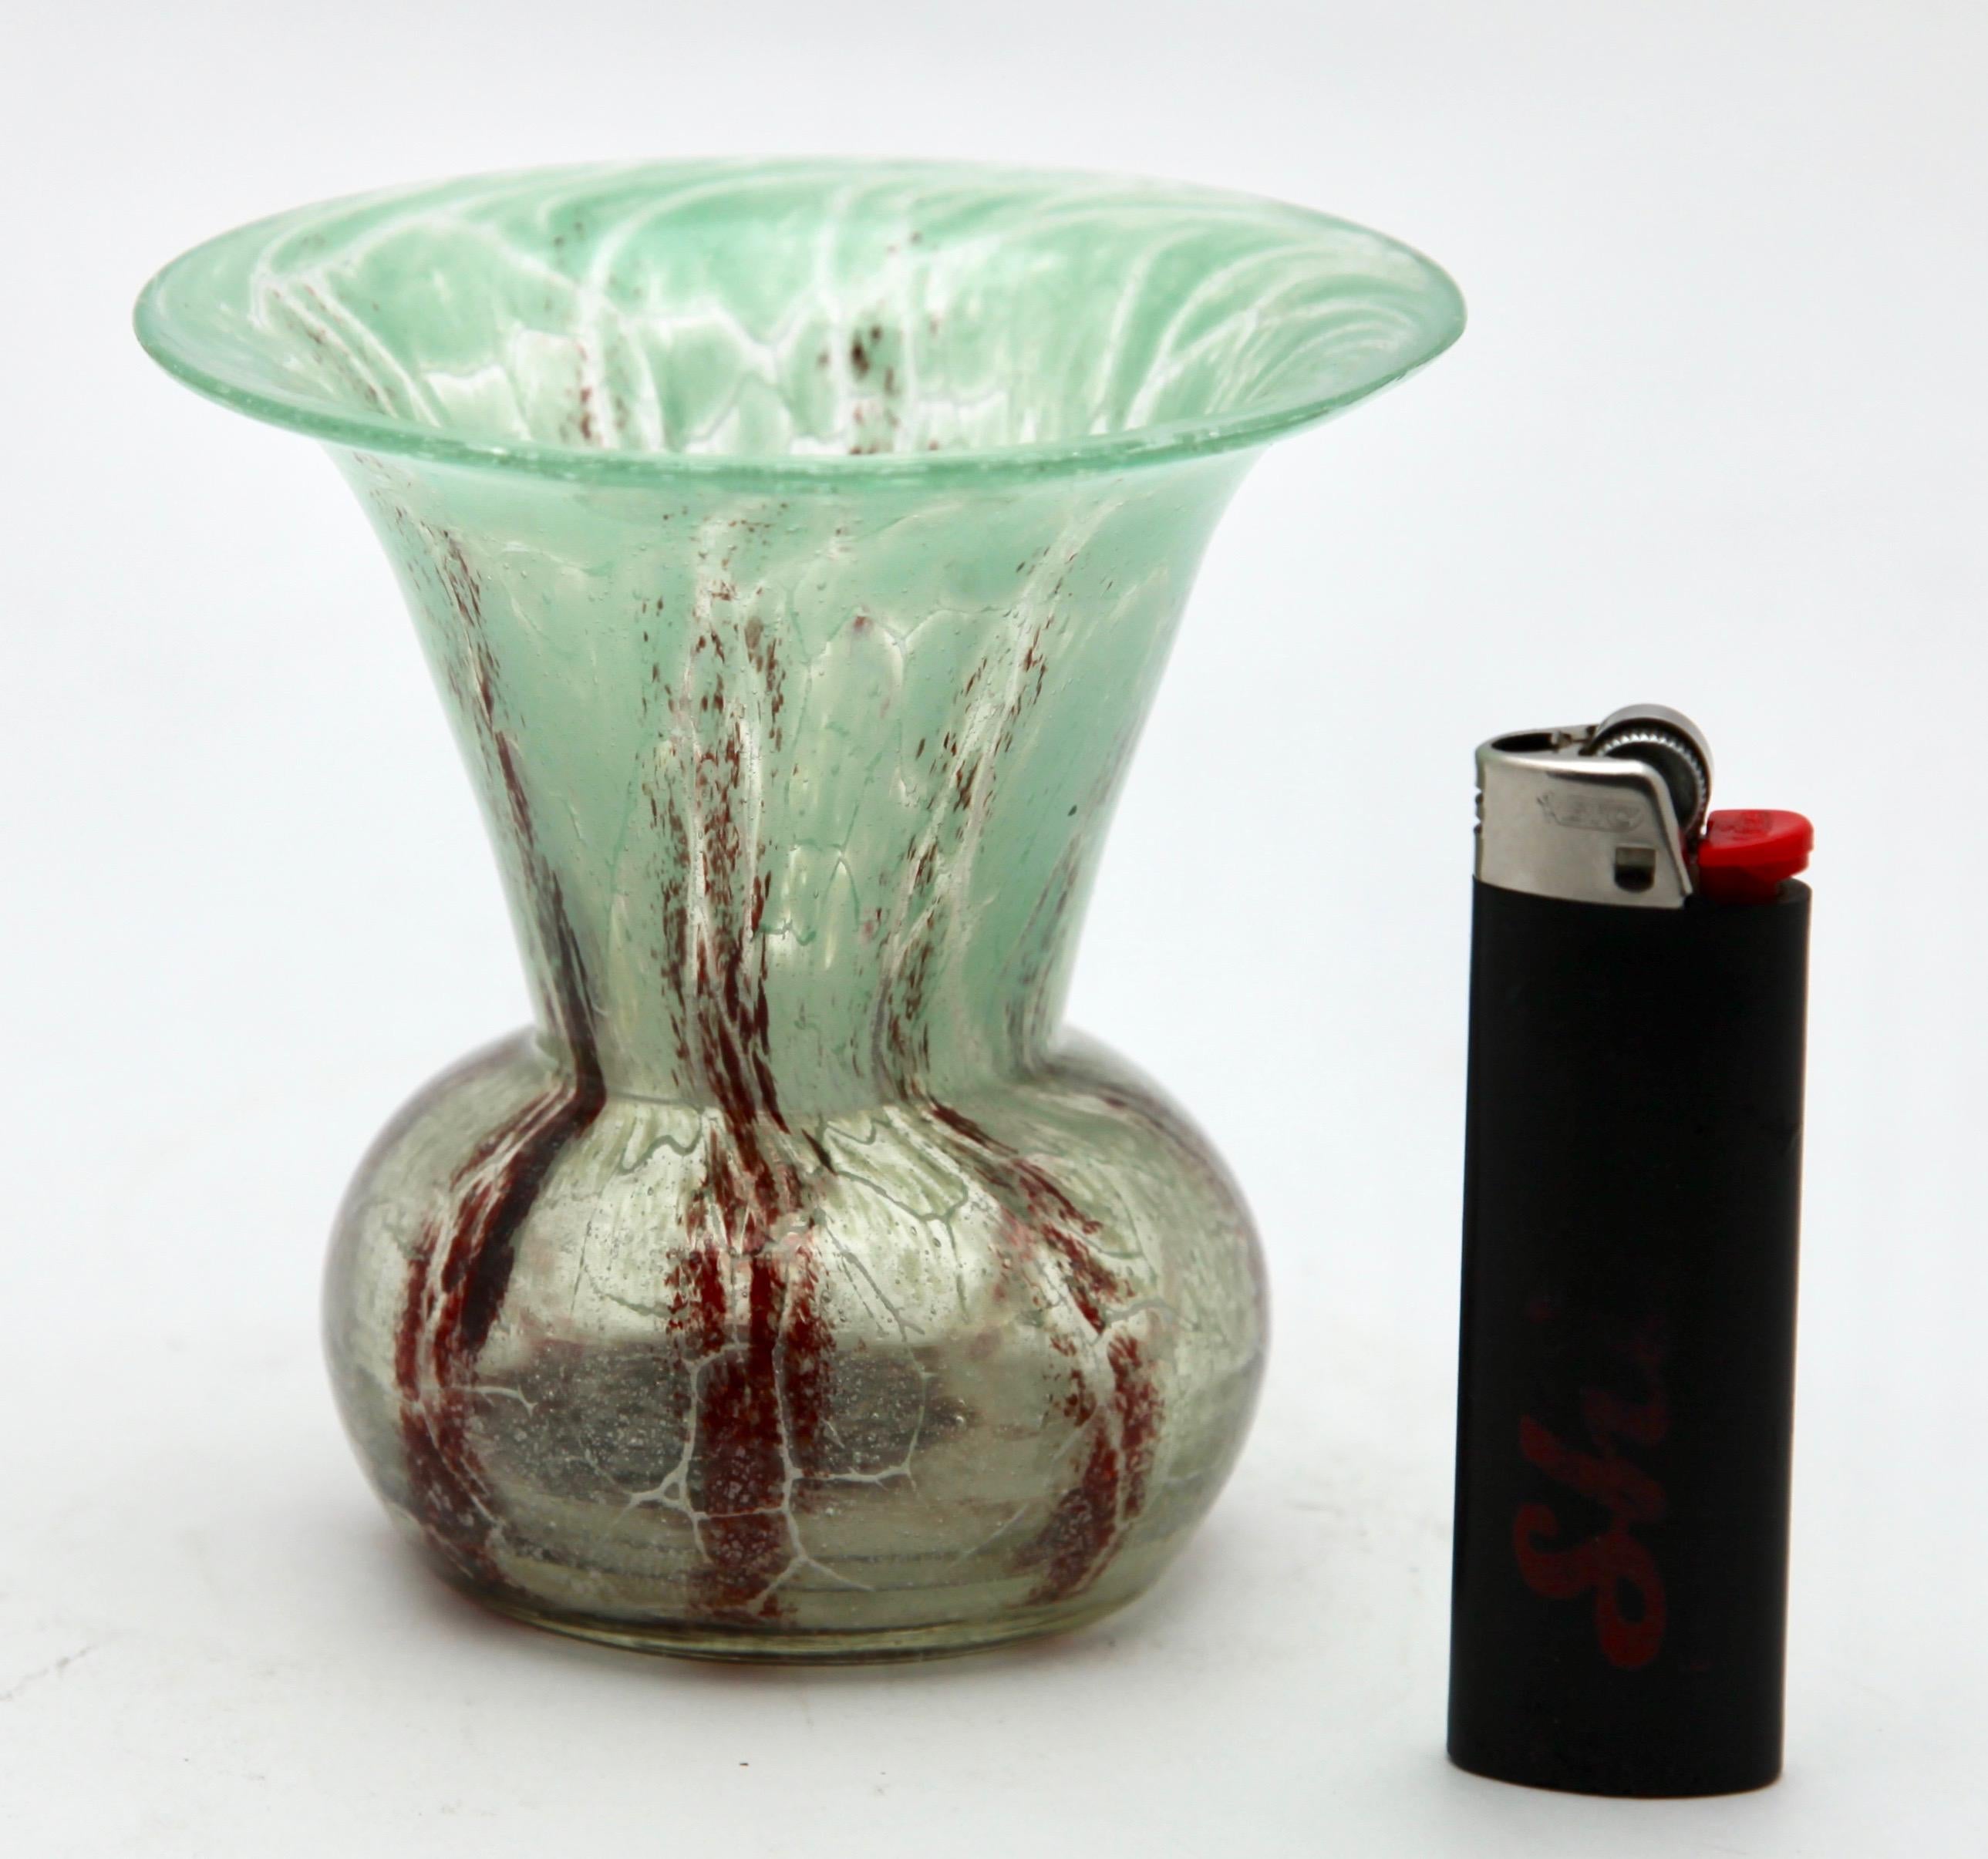 Hand-Crafted 'Ikora' Art Glass Vase, Produced, by WMF in Germany, 1930s by Karl Wiedmann For Sale